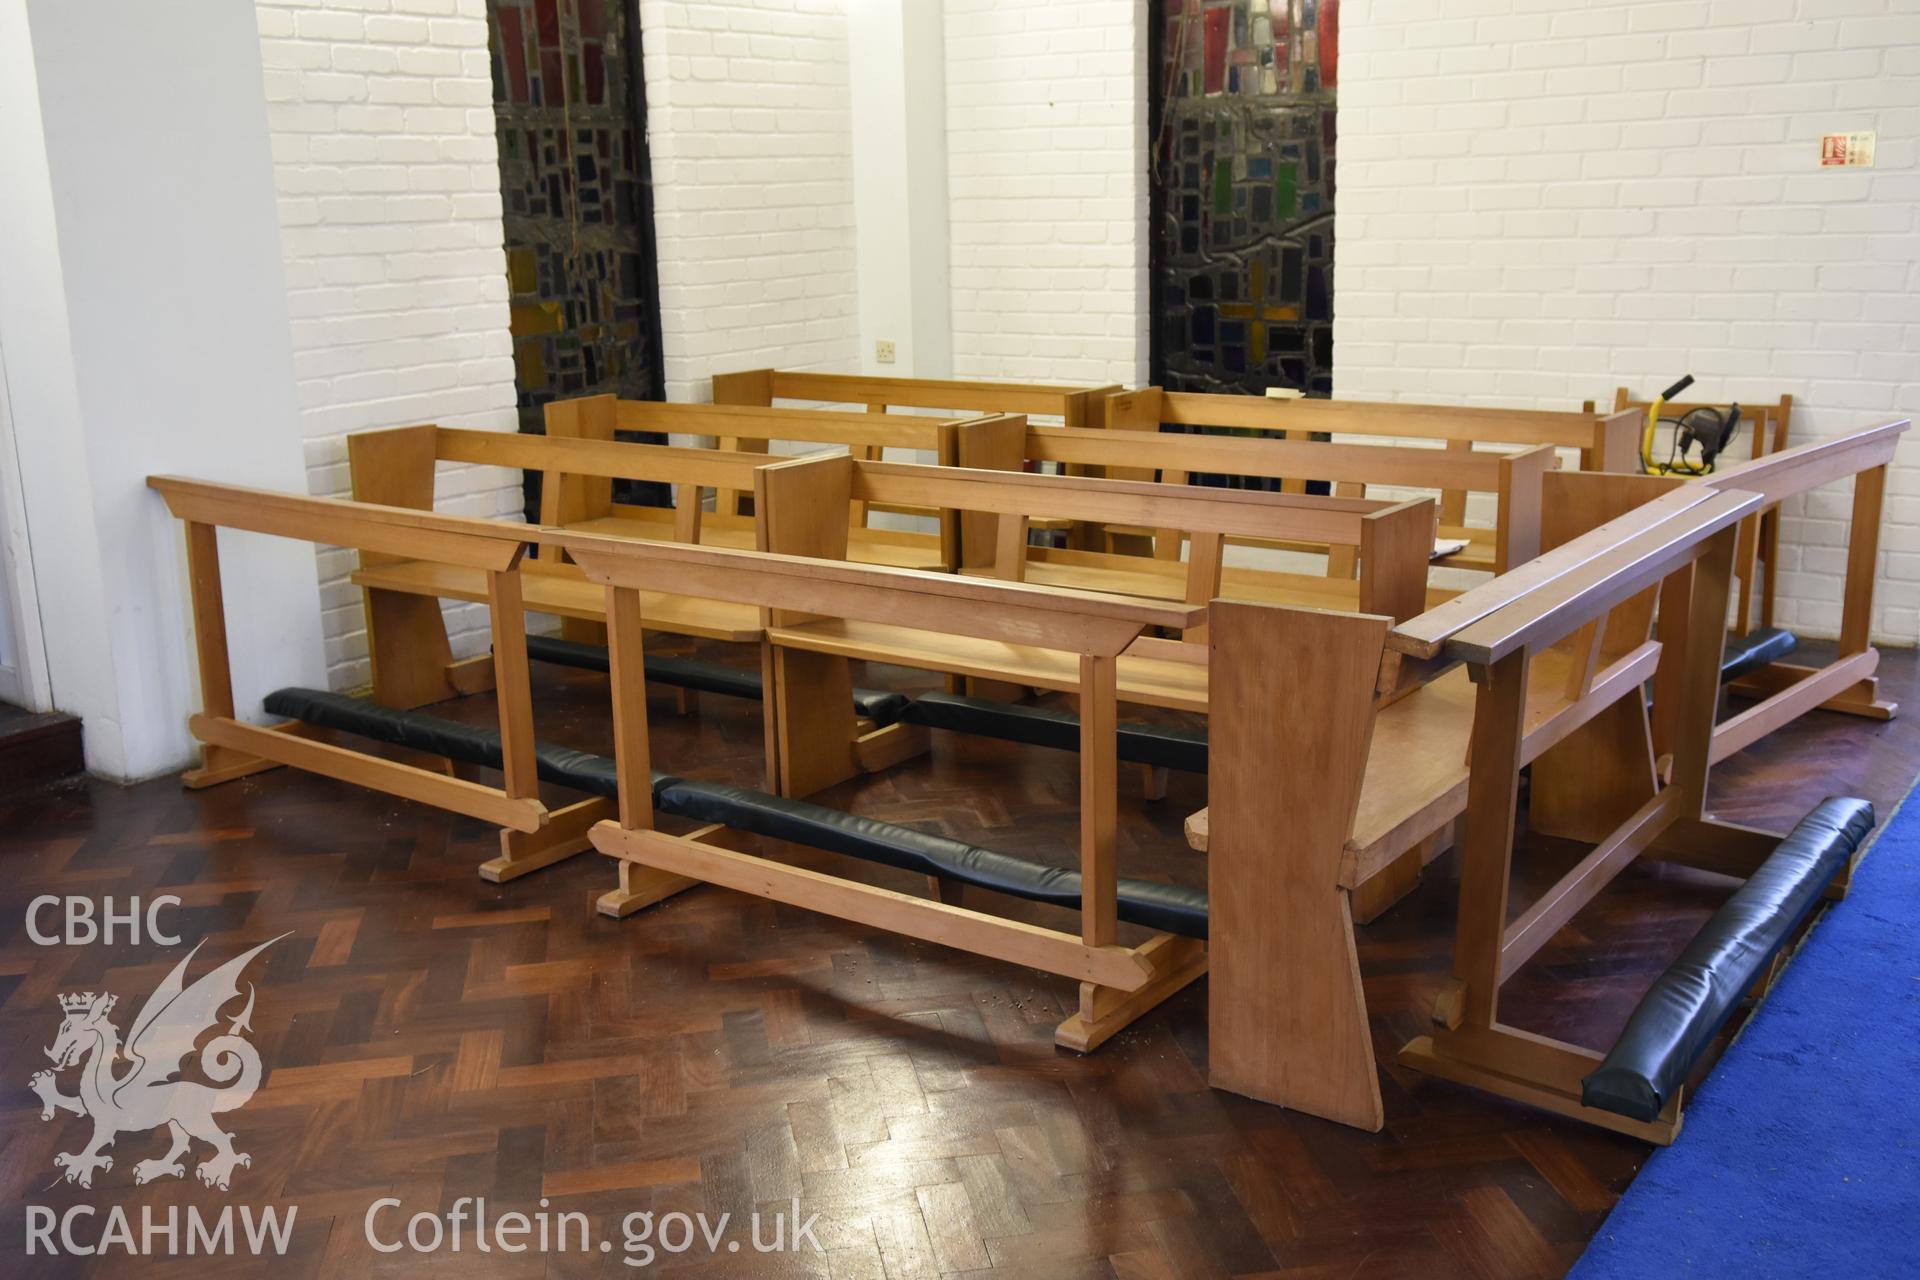 The Resurrection of Our Saviour Catholic Church, pews. Photographed by Sue Fielding on 11th January 2019.